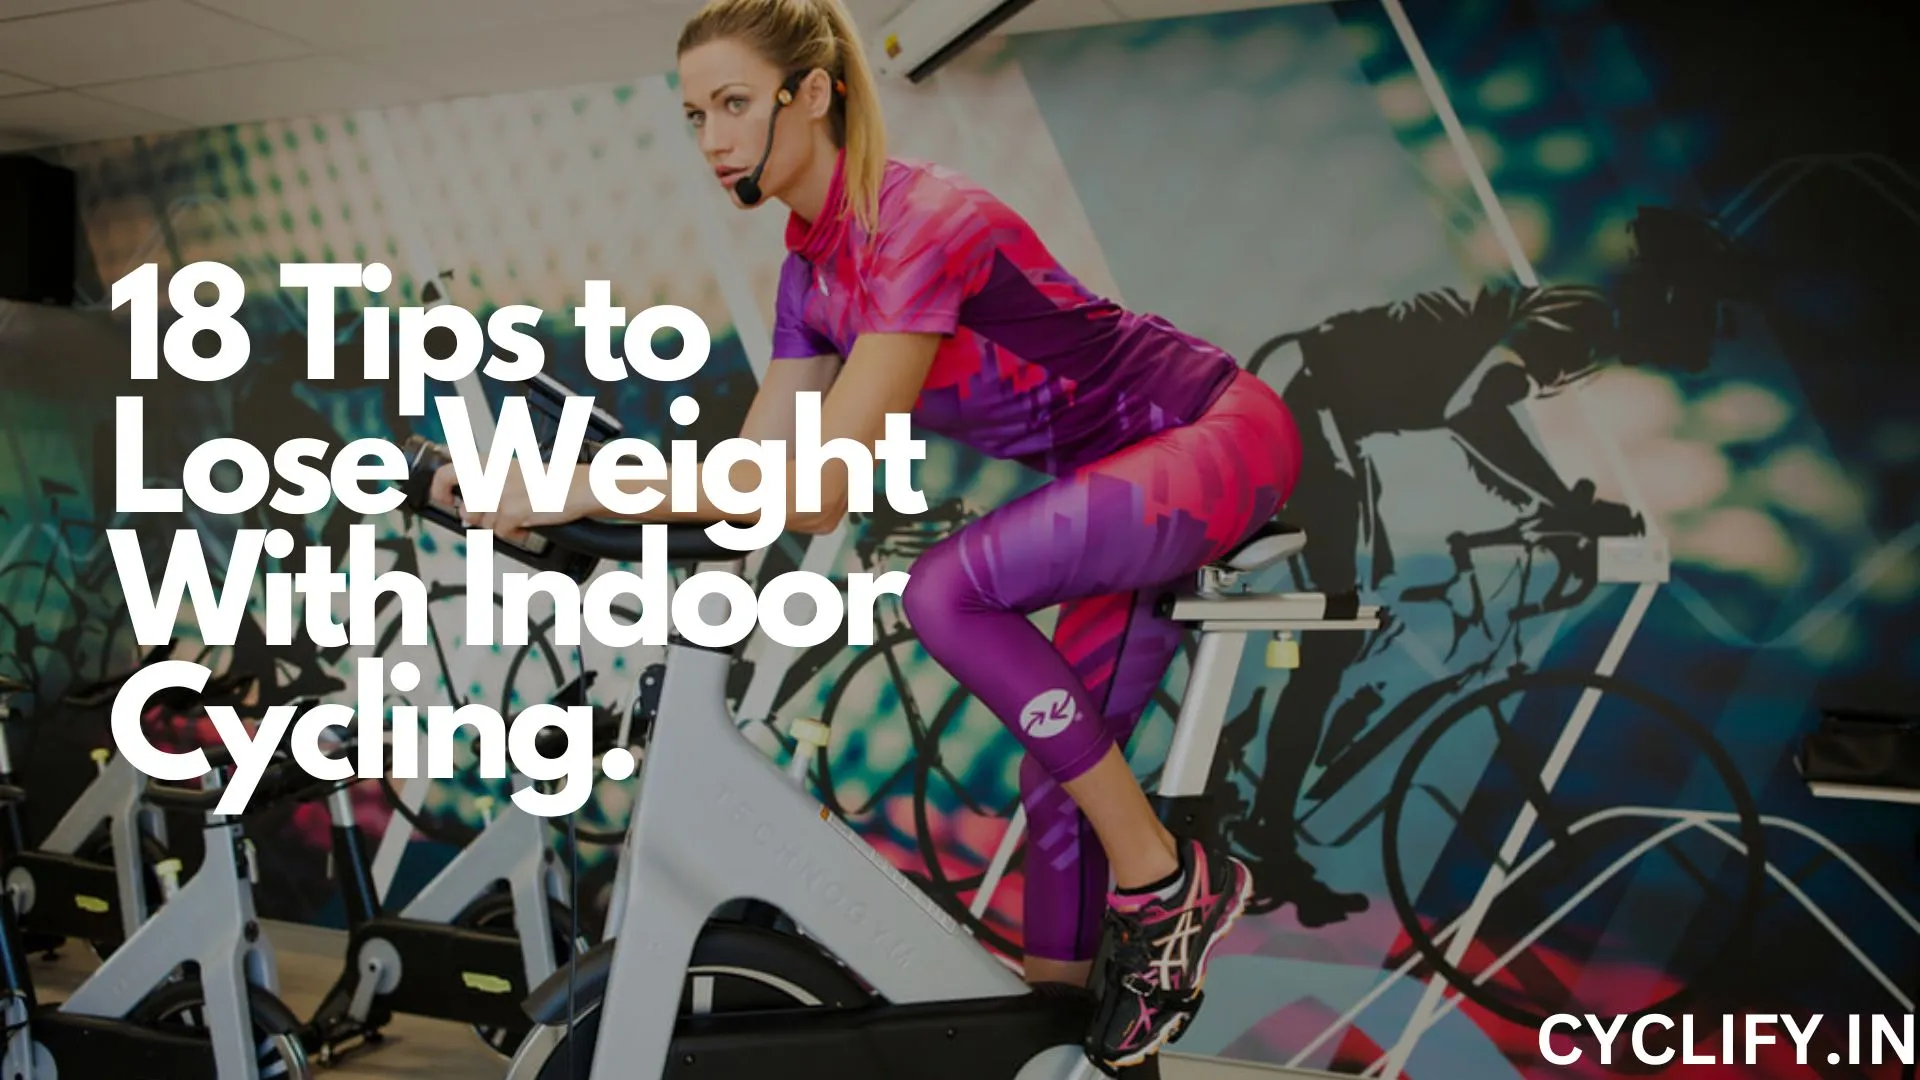 Lose weight with Indoor Cycling - A girl riding a stationary bike.